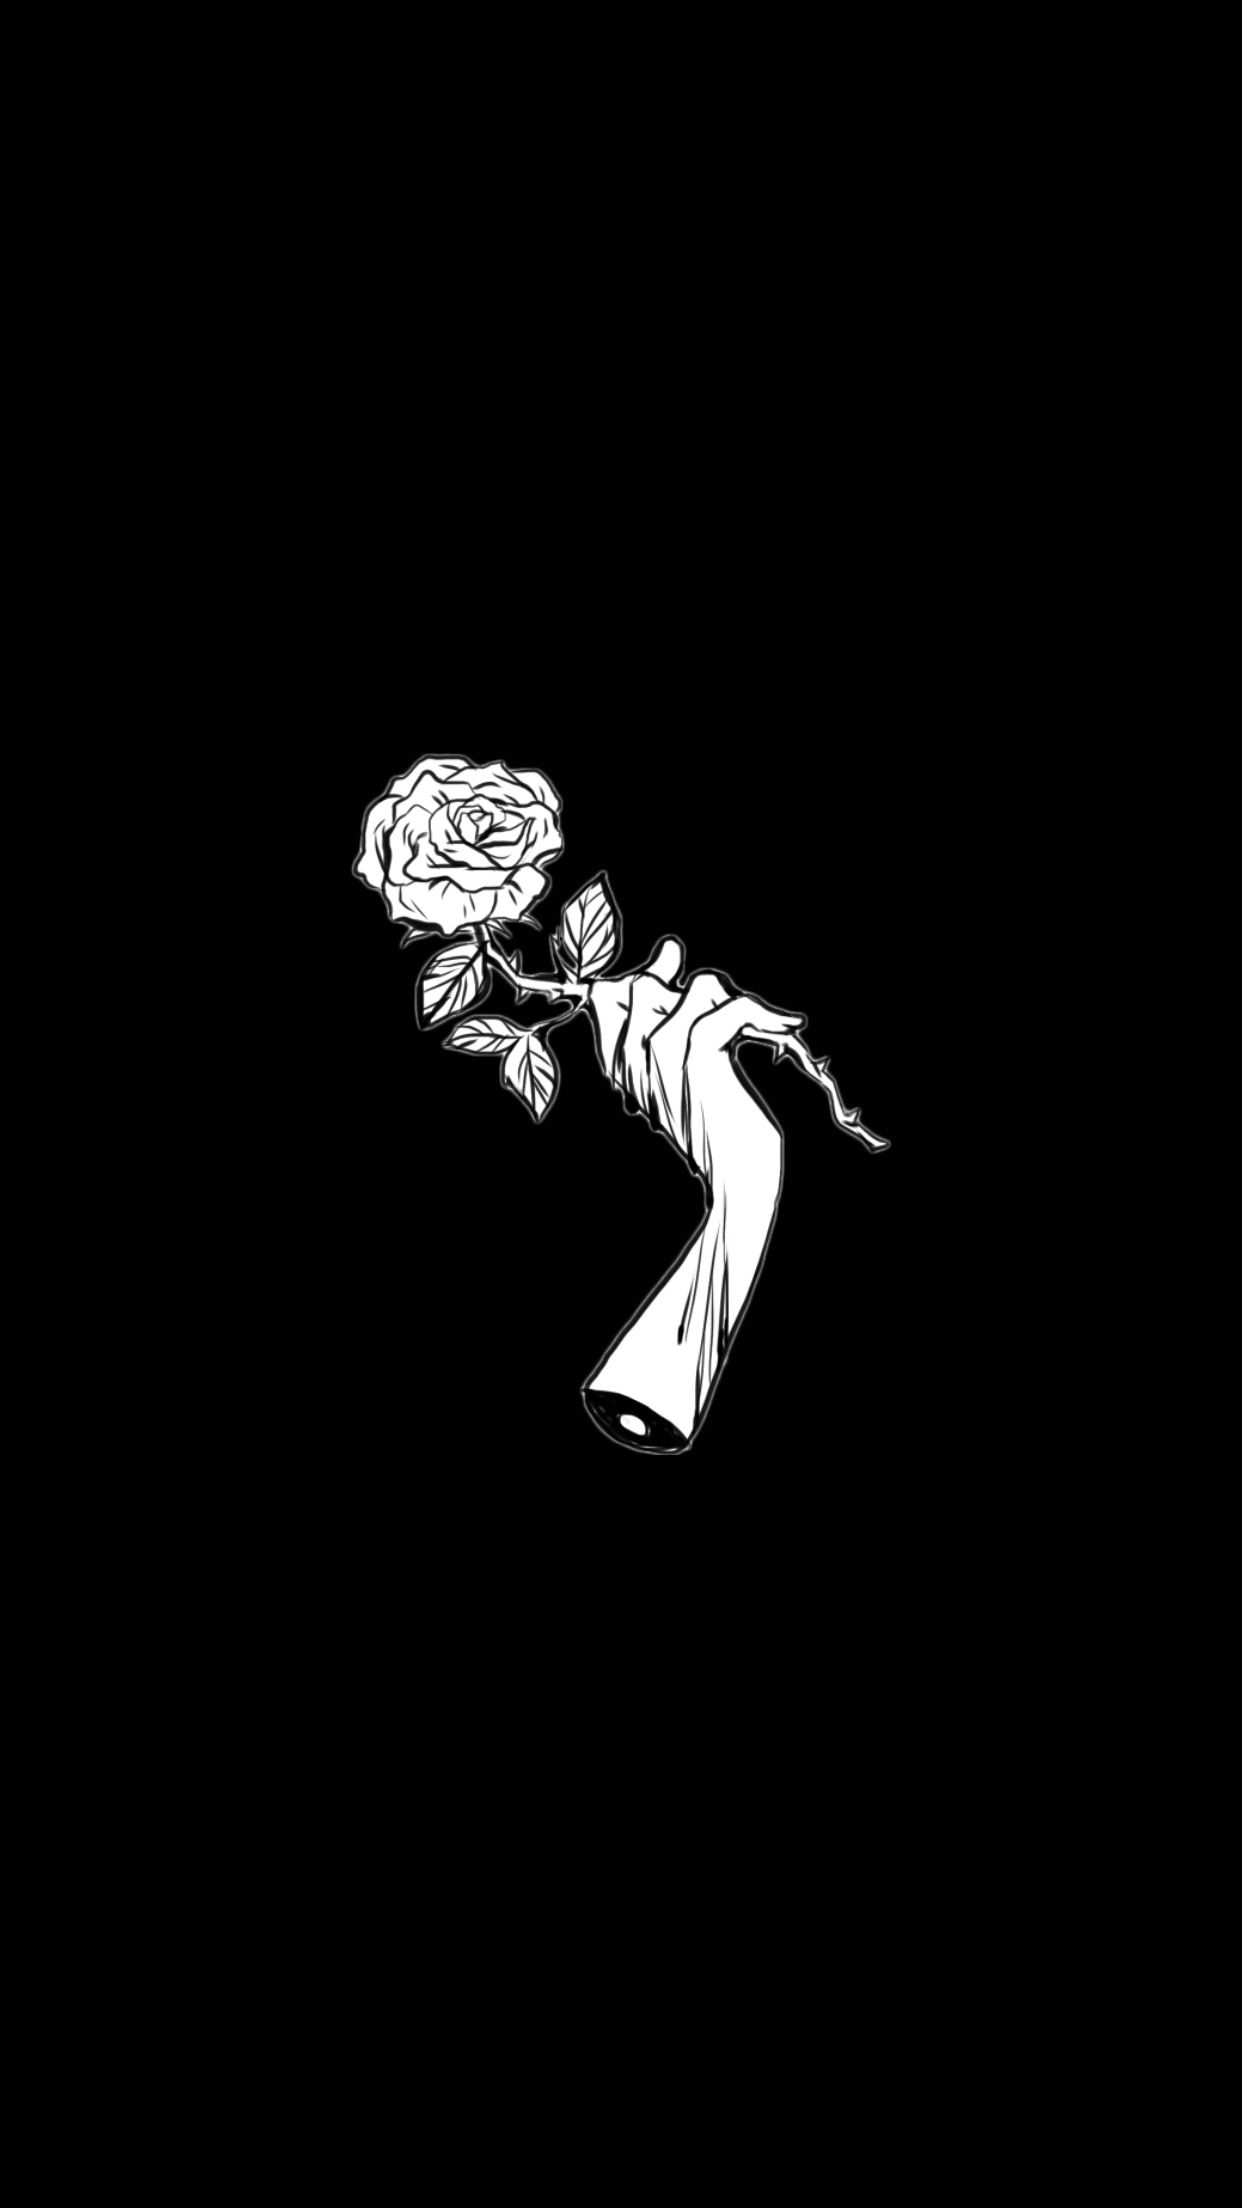 A black and white image of an arm holding flowers - Gothic